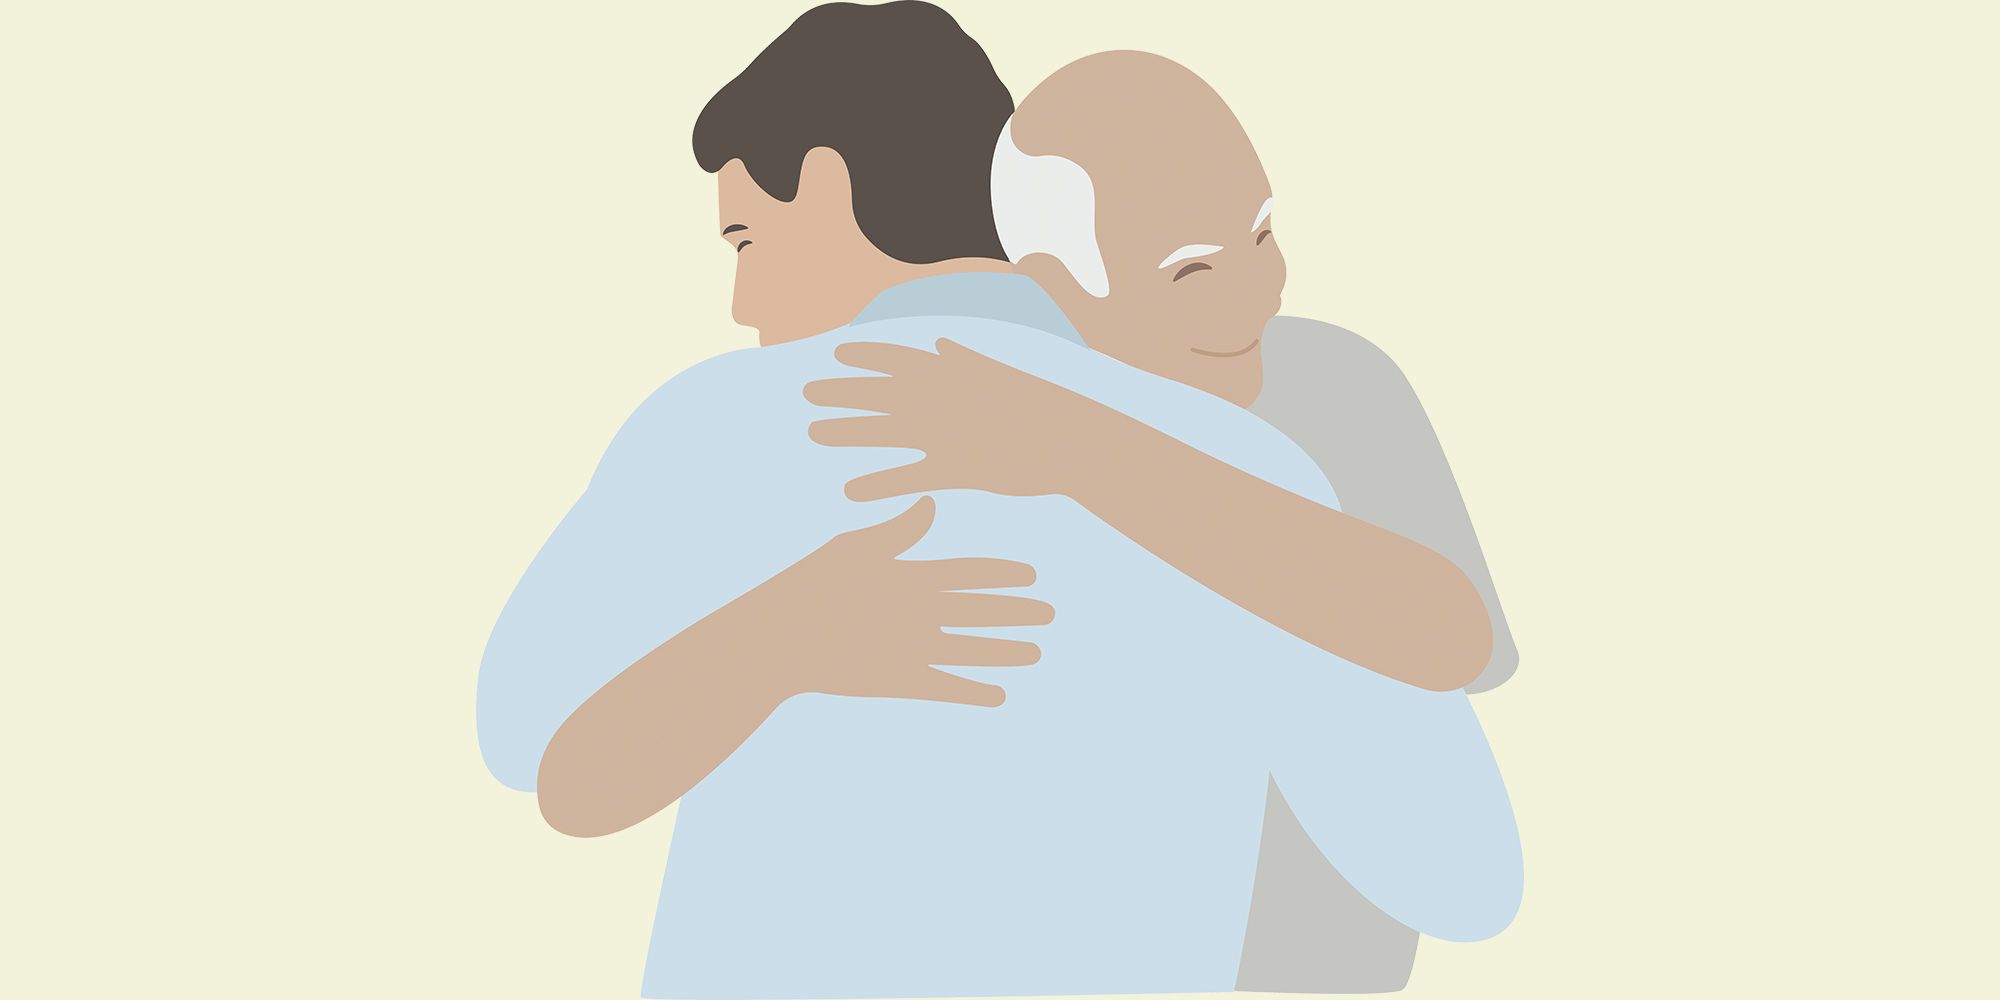 This is How Long a Hug Should Last, According to Scientists